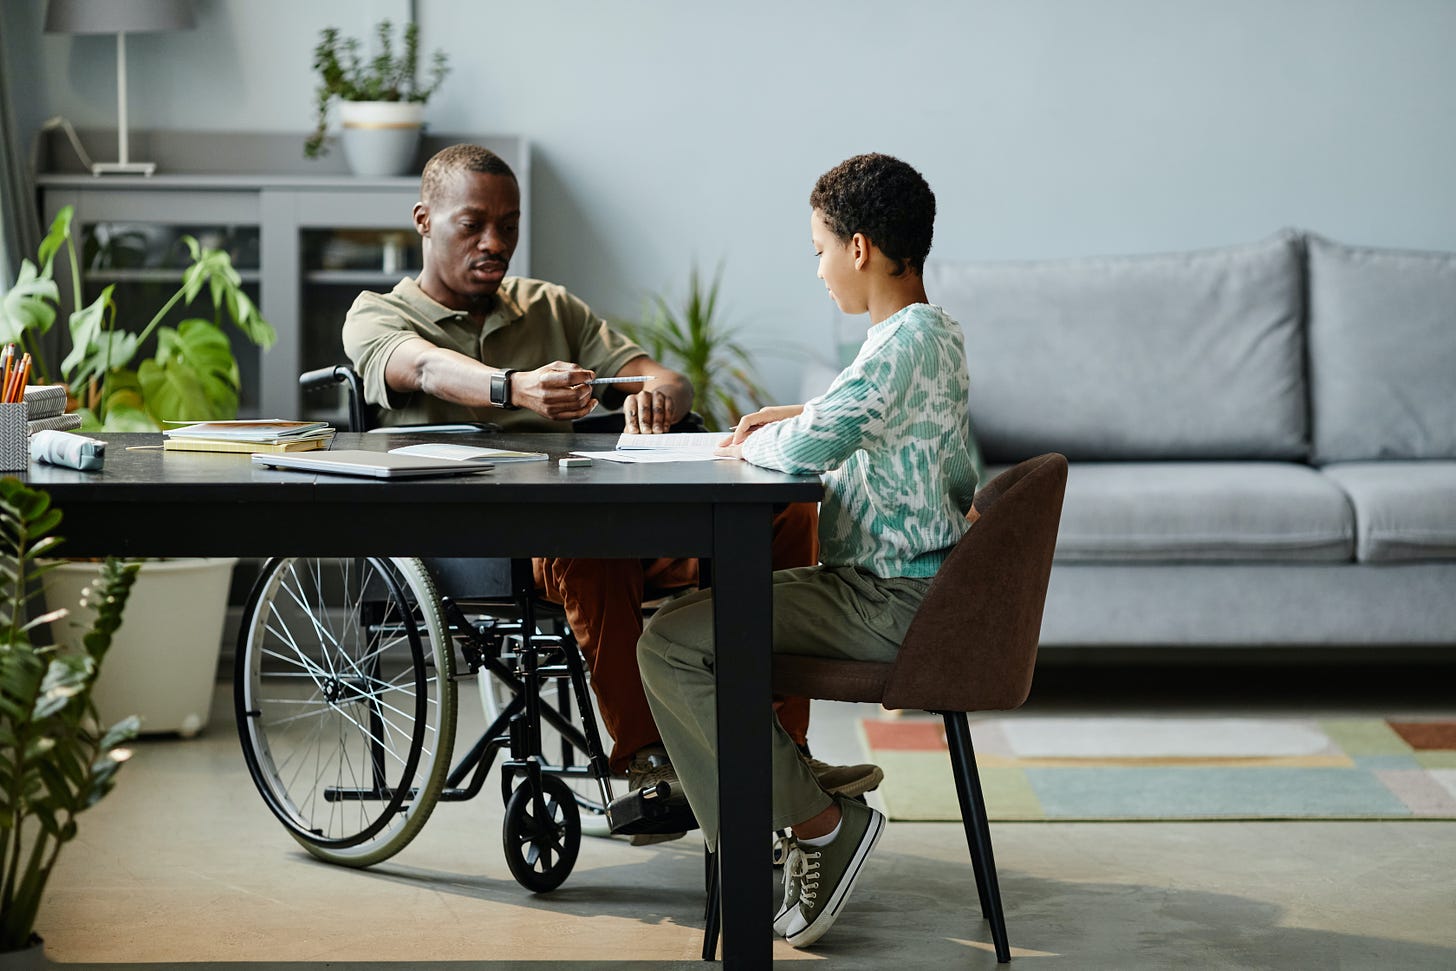 A black man in a manual wheelchair is sitting at a table with a younger boy. It could be a school or an office .